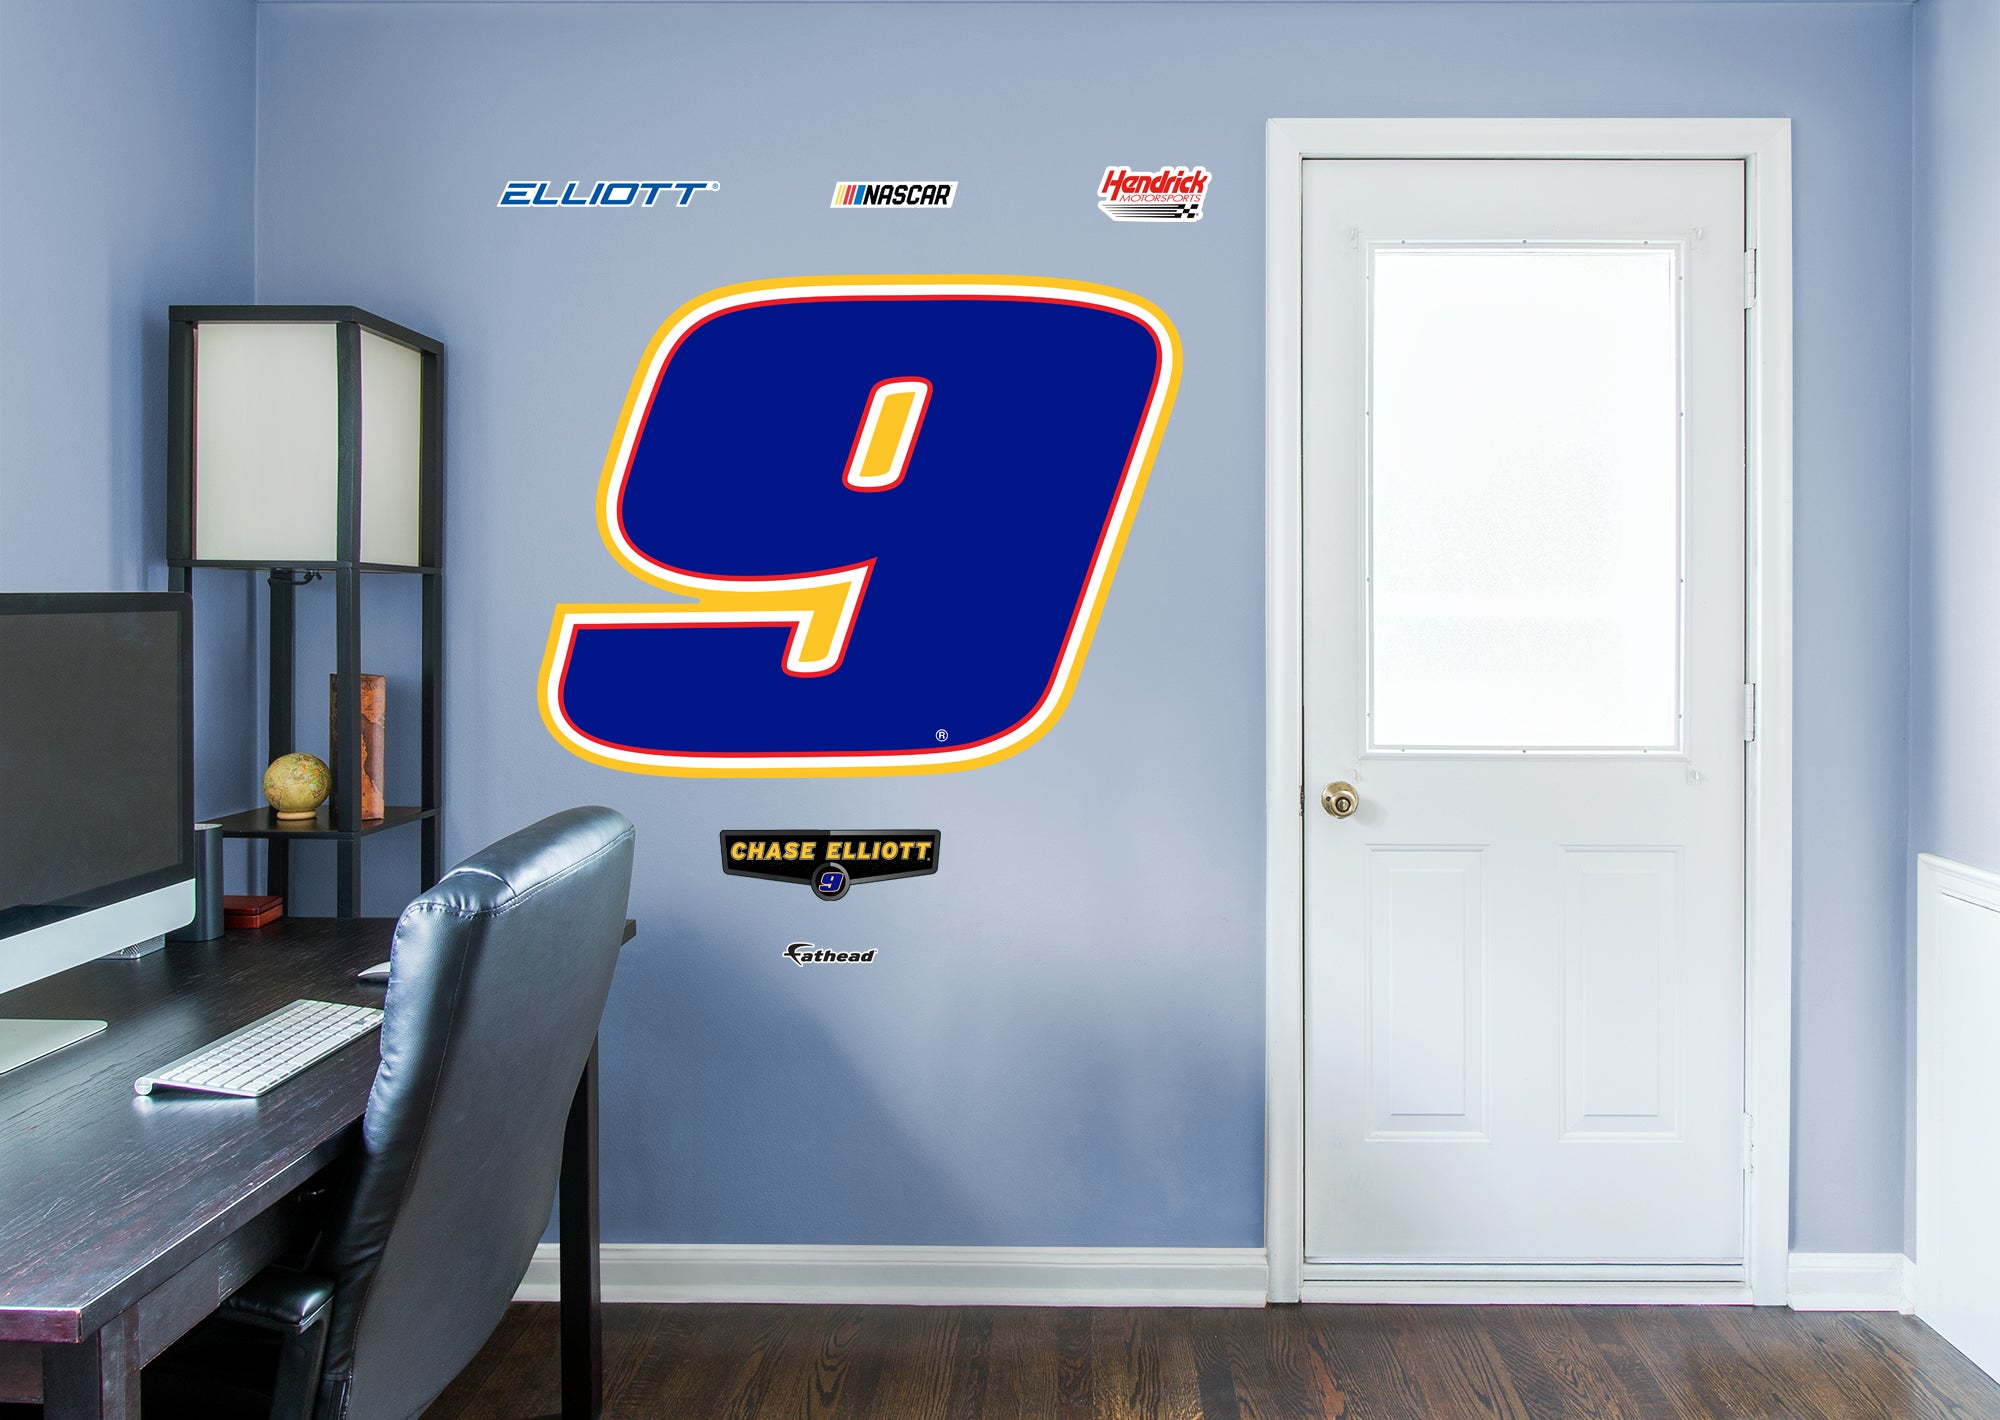 Chase Elliott 2021 #9 Logo - Officially Licensed NASCAR Removable Wall Decal Giant Logo + 2 Decals (38"W x 49"H) by Fathead | Vi